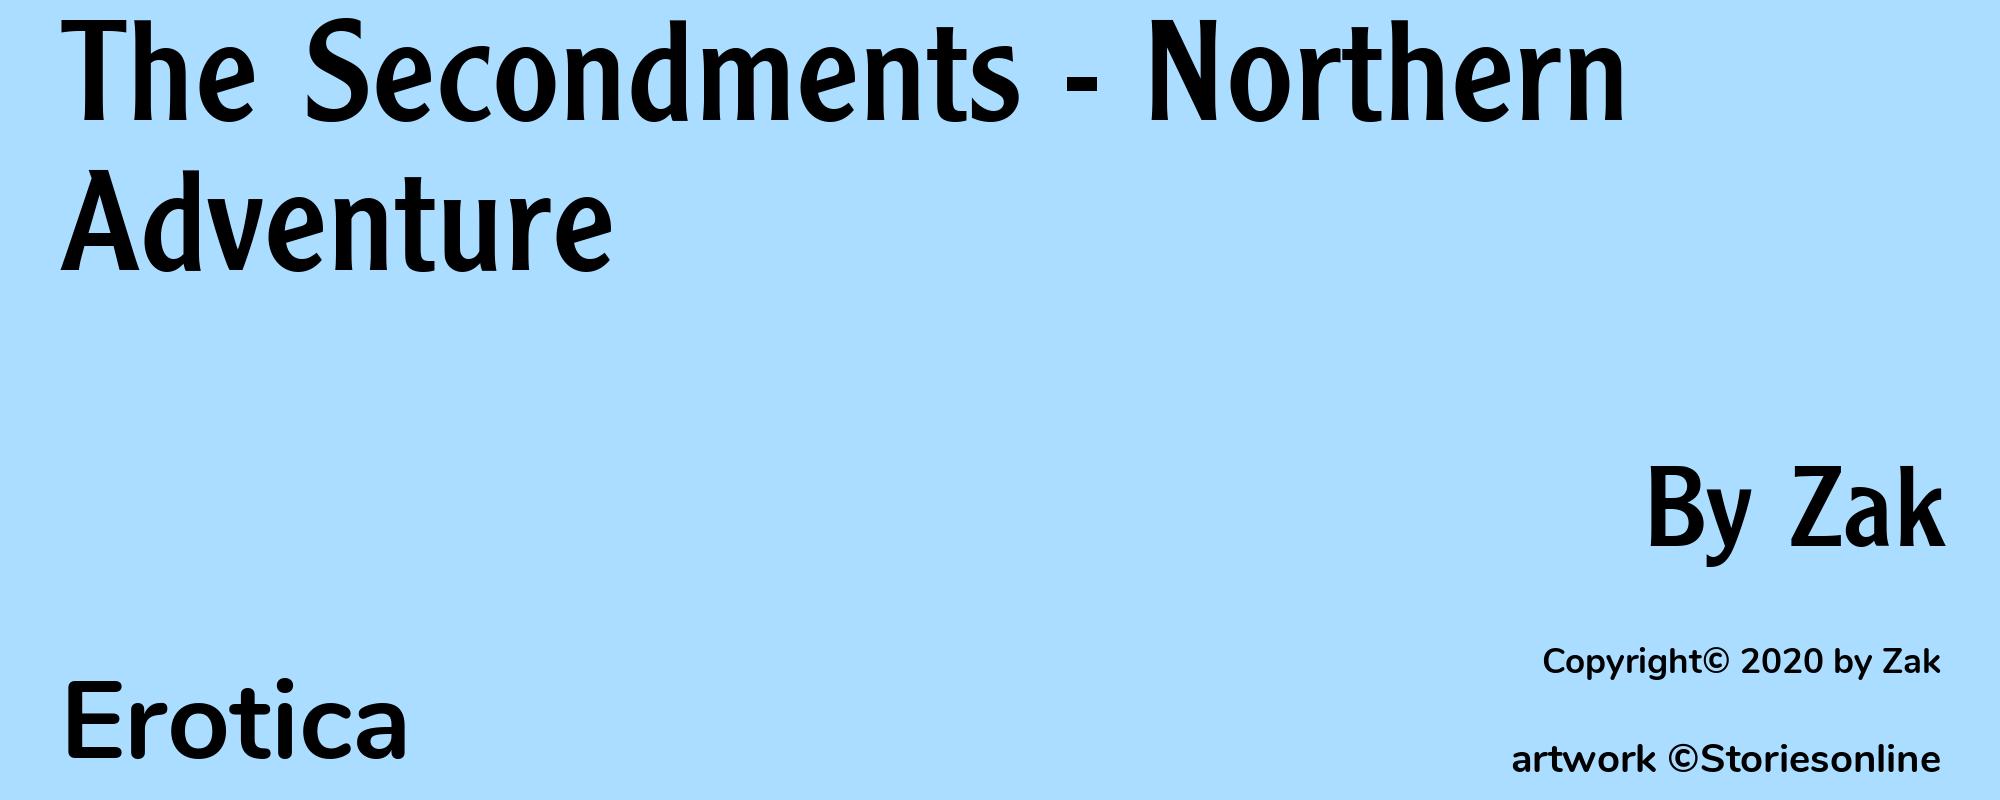 The Secondments - Northern Adventure - Cover